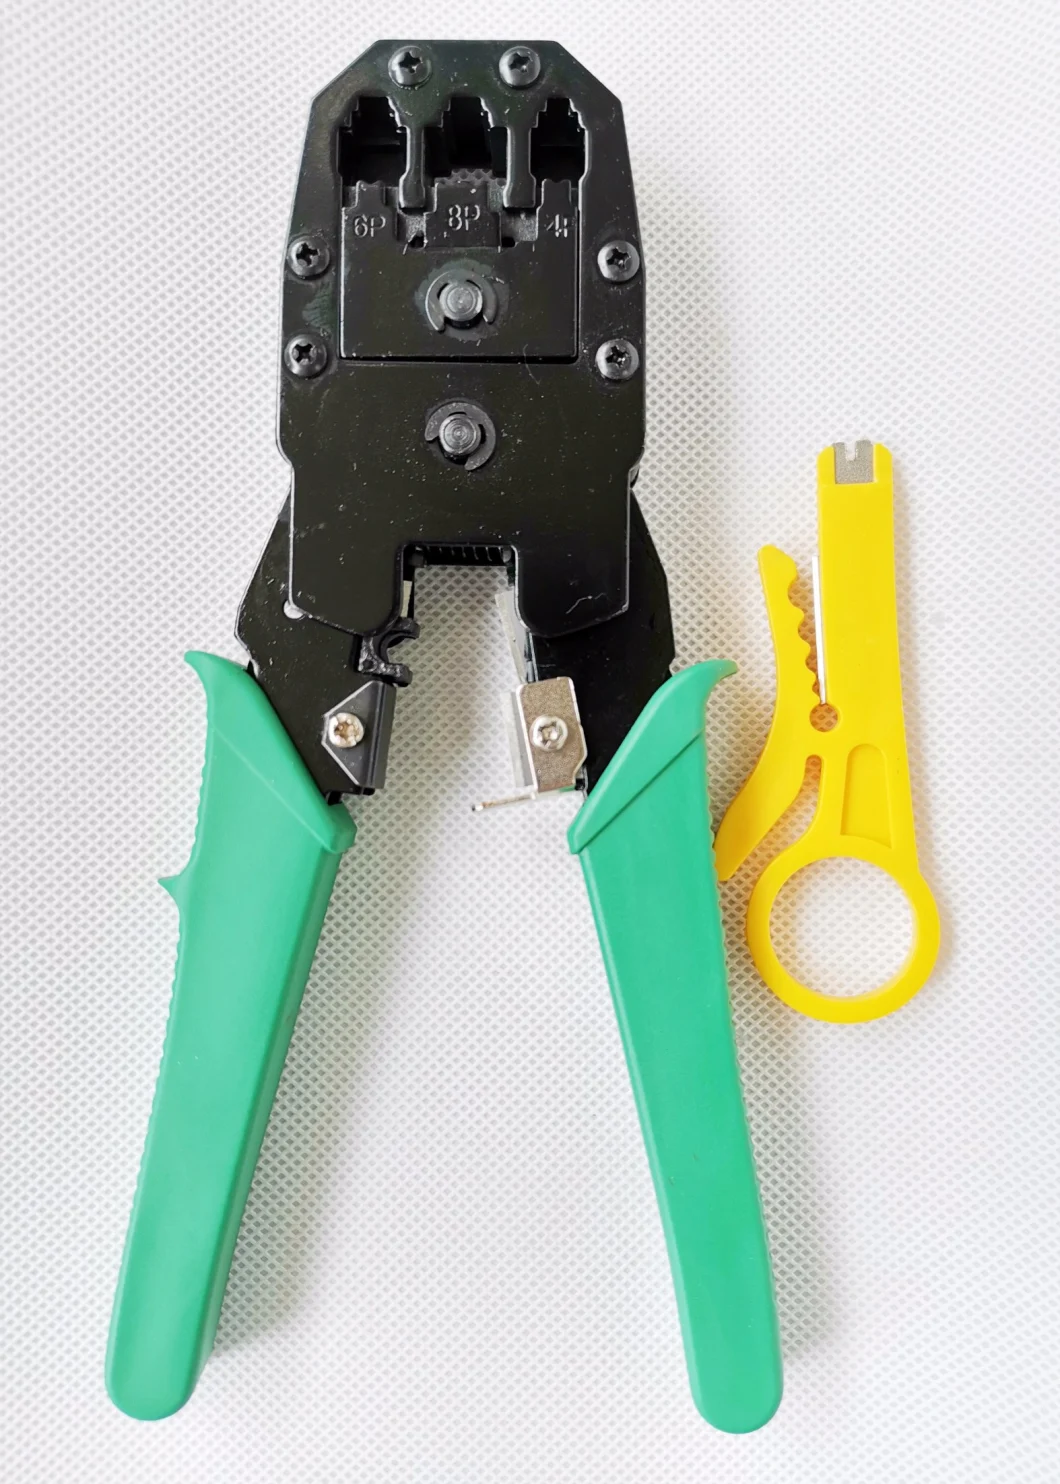 4p 6p 8p 3 in 1 Networking Ethernet Stripper Wire Stripping Network Tool Wire Cutter Cable Modualr RJ45 Crimper Tool